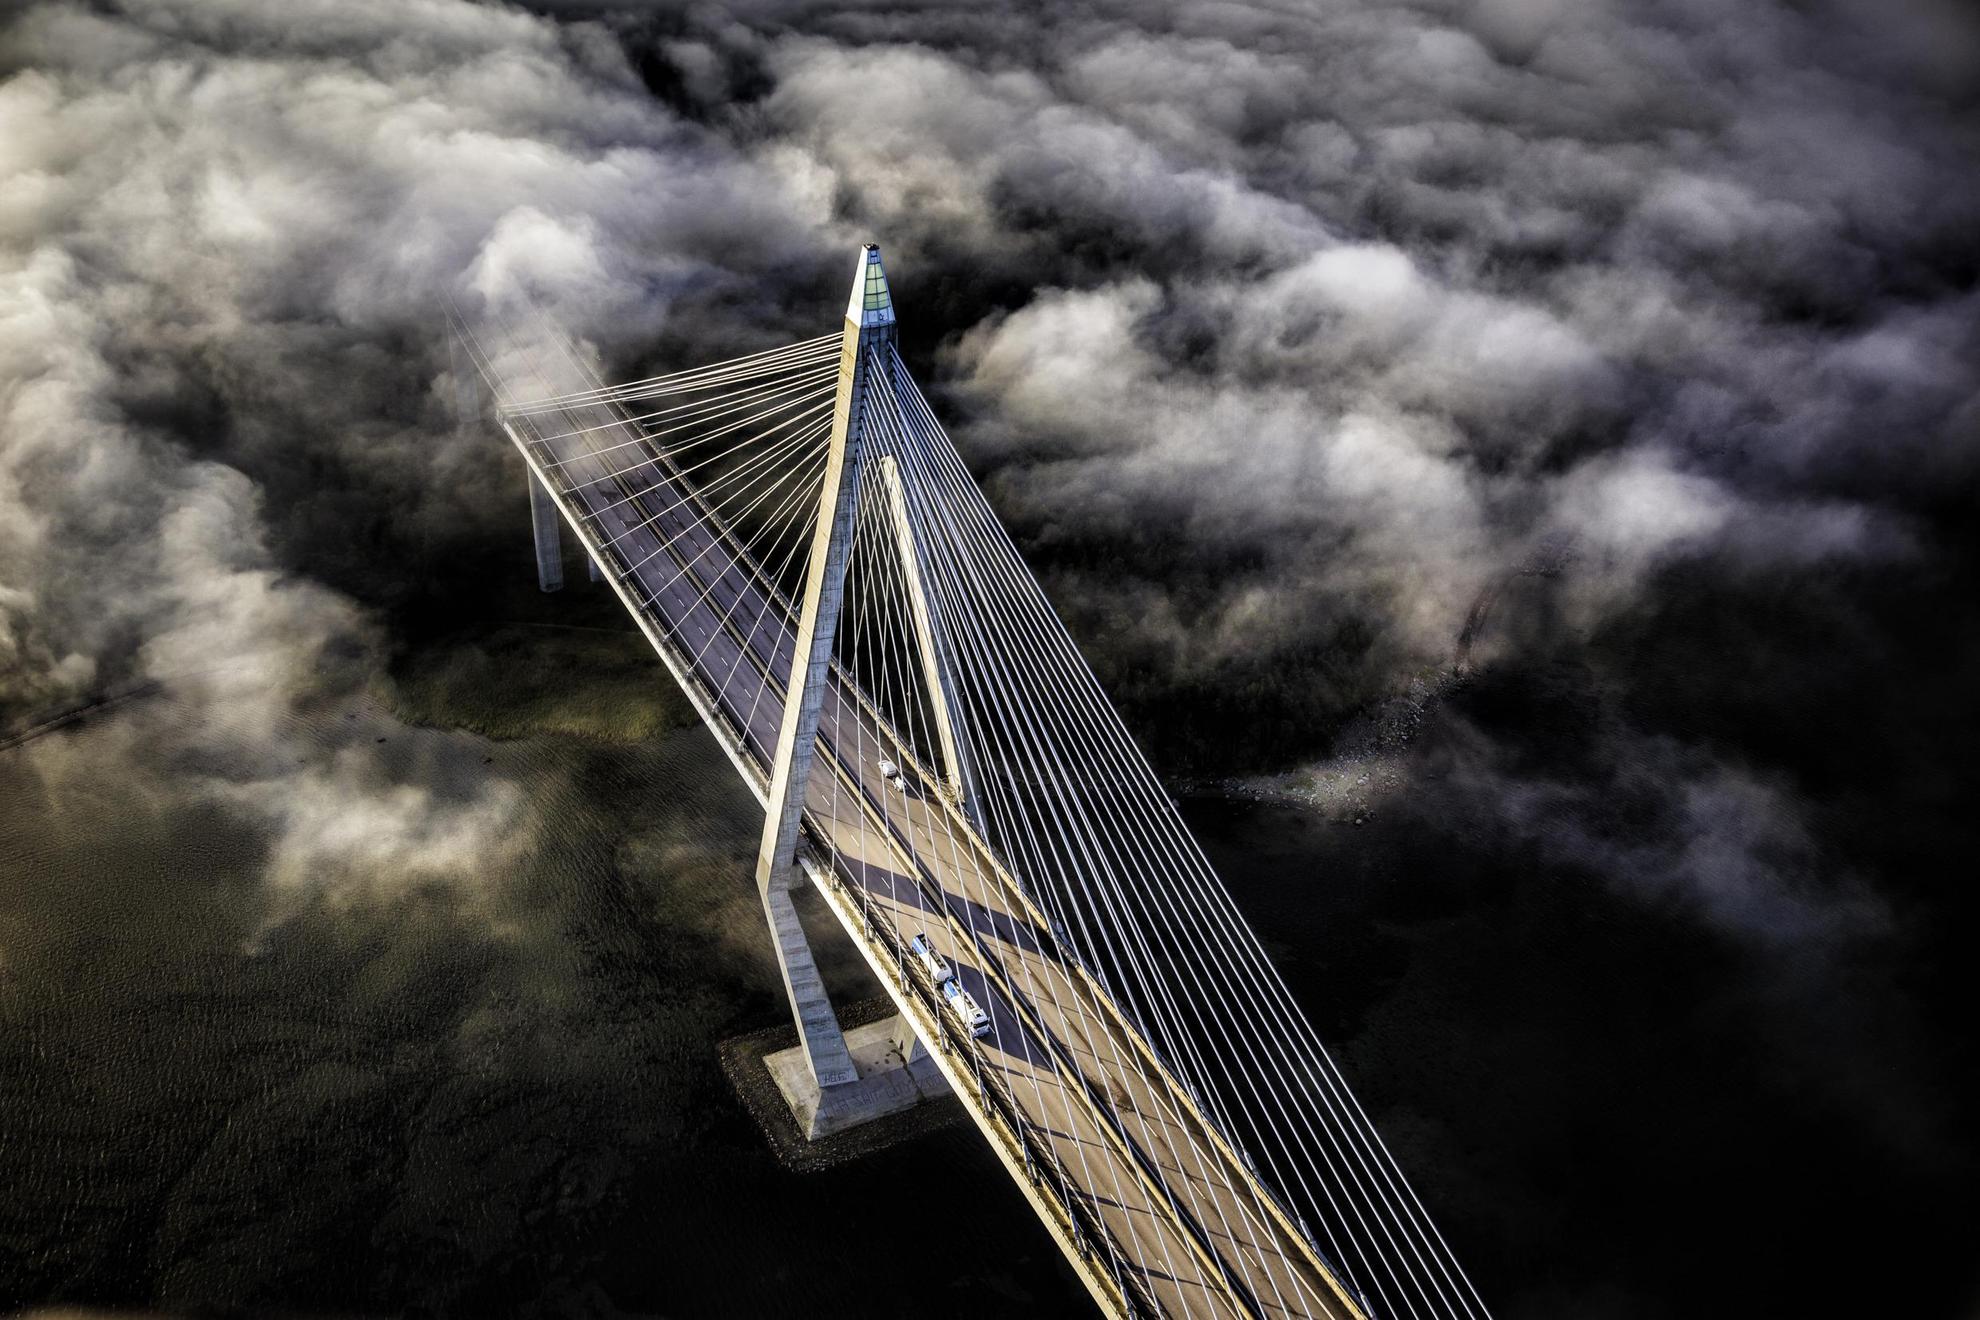 A view from above of the Uddevalla Bridge in fog. There is traffic on the bridge and water underneath.